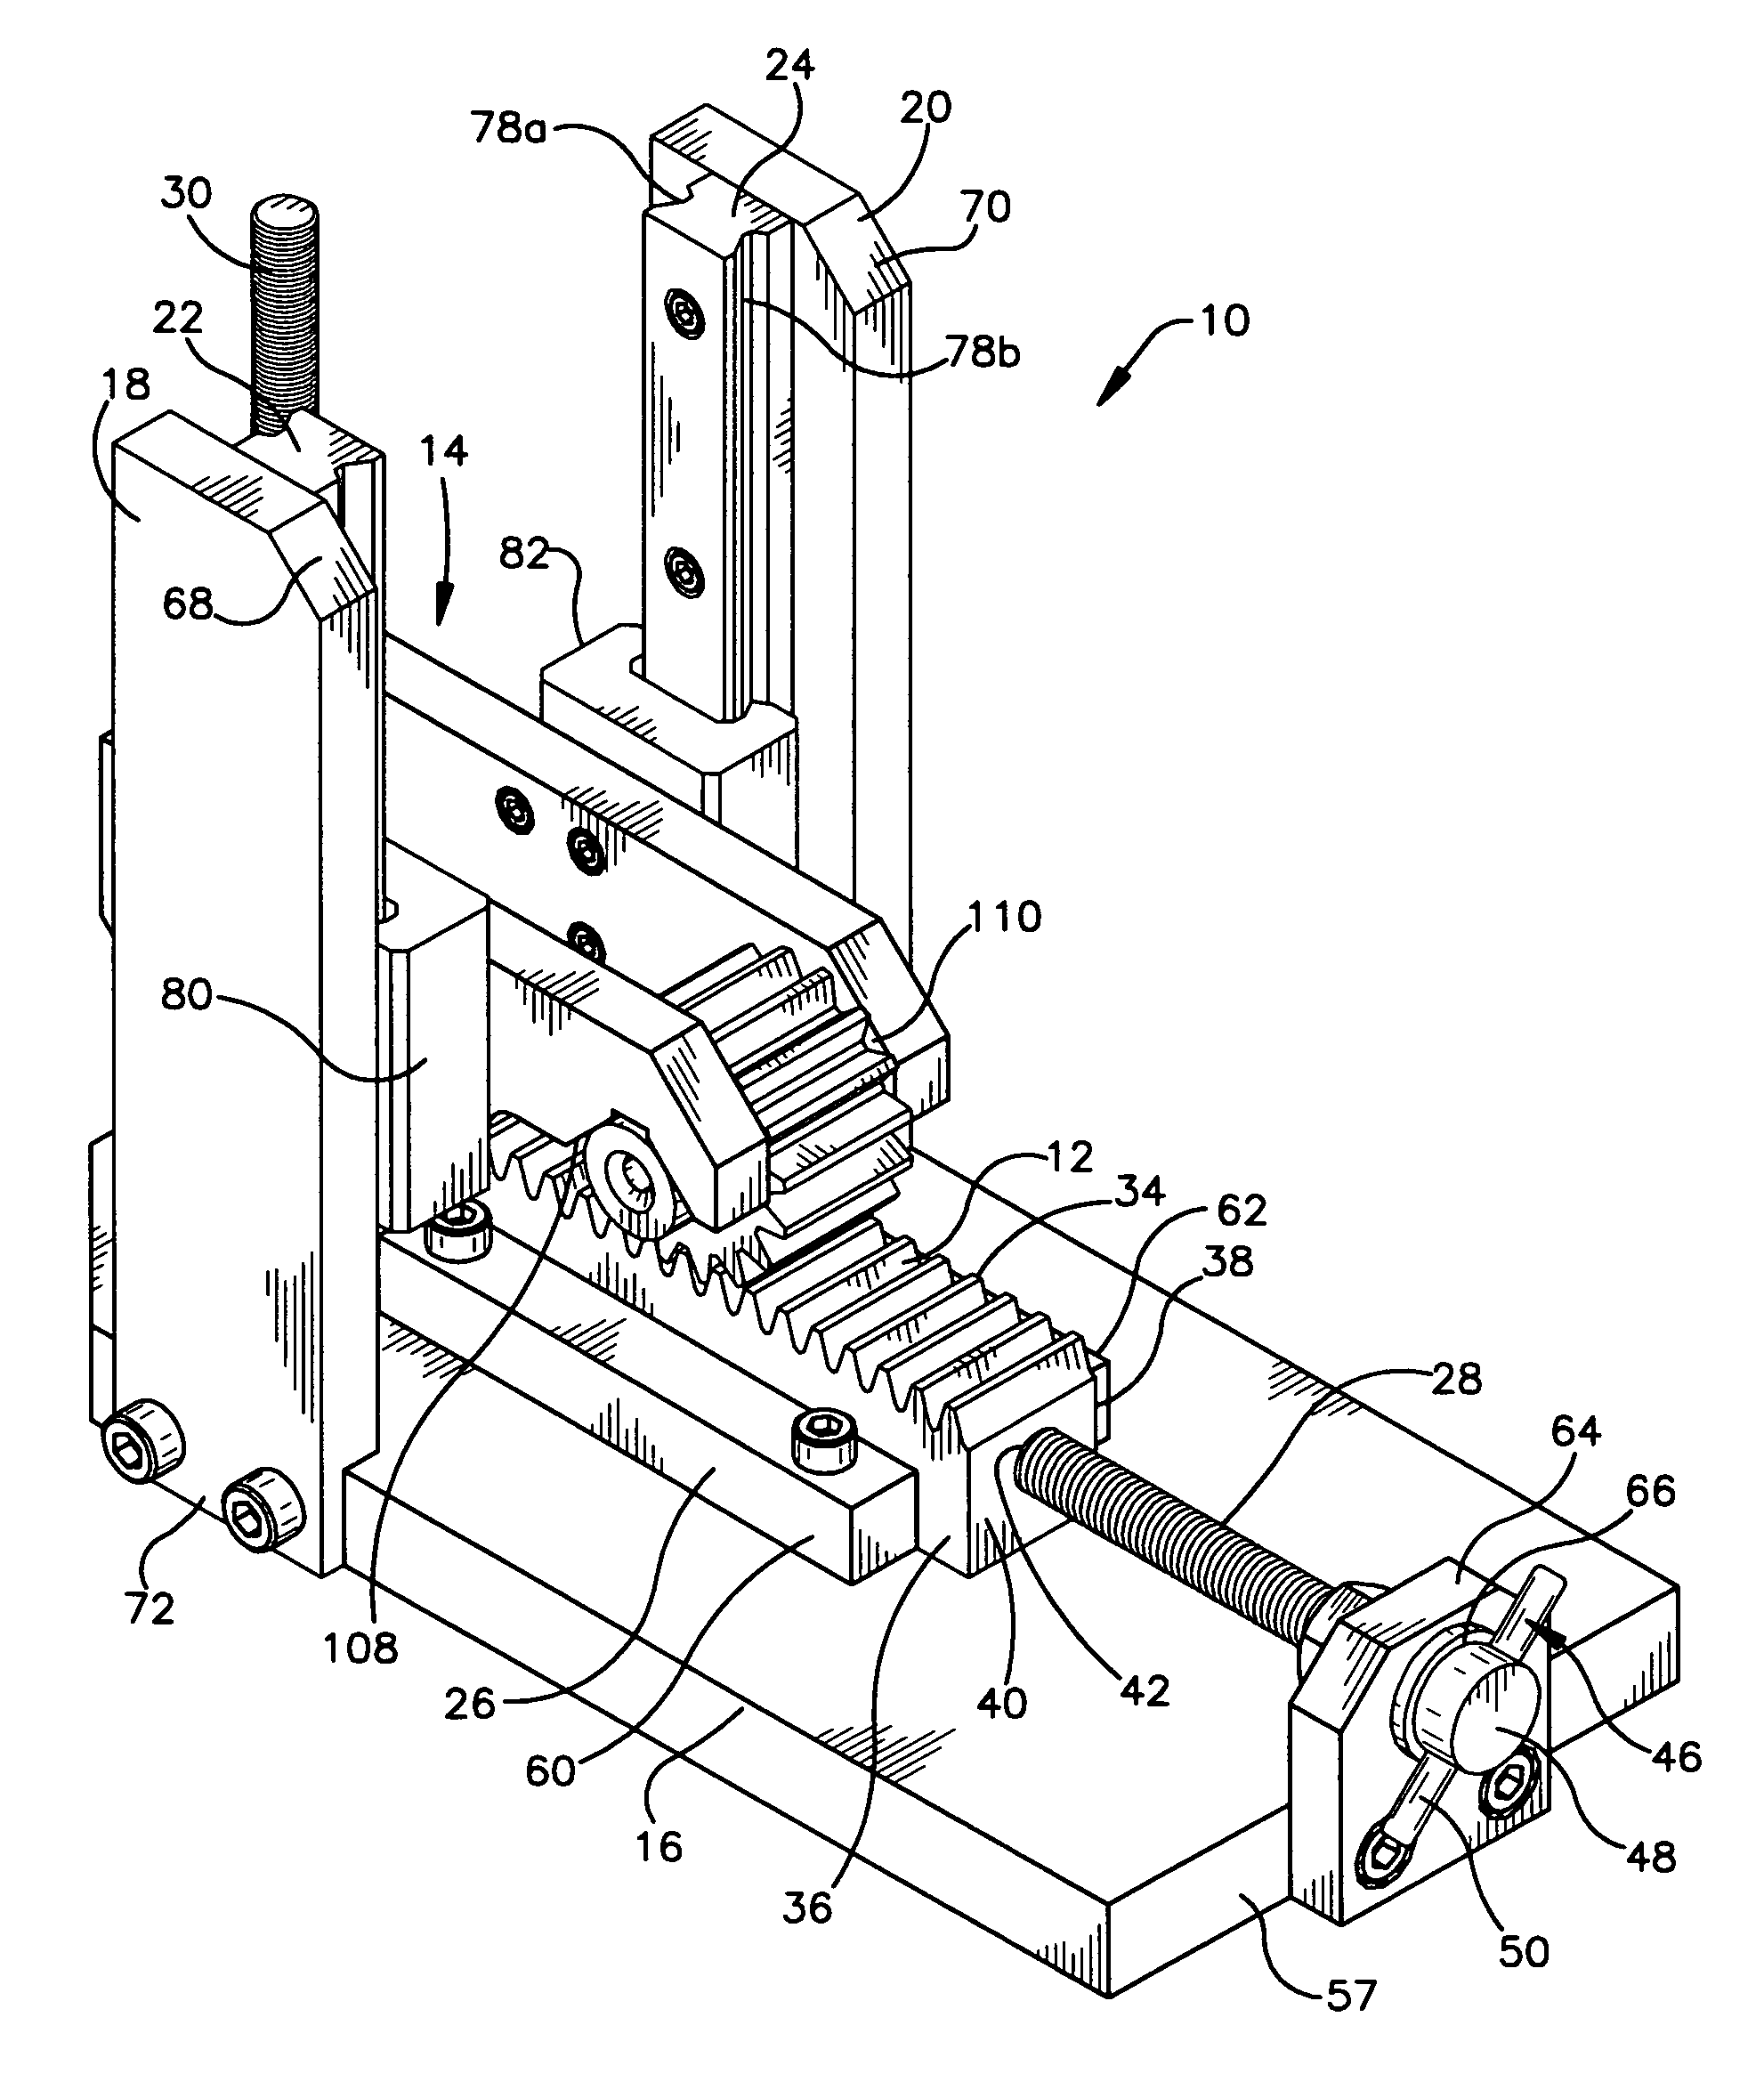 Fixture for holding a gear